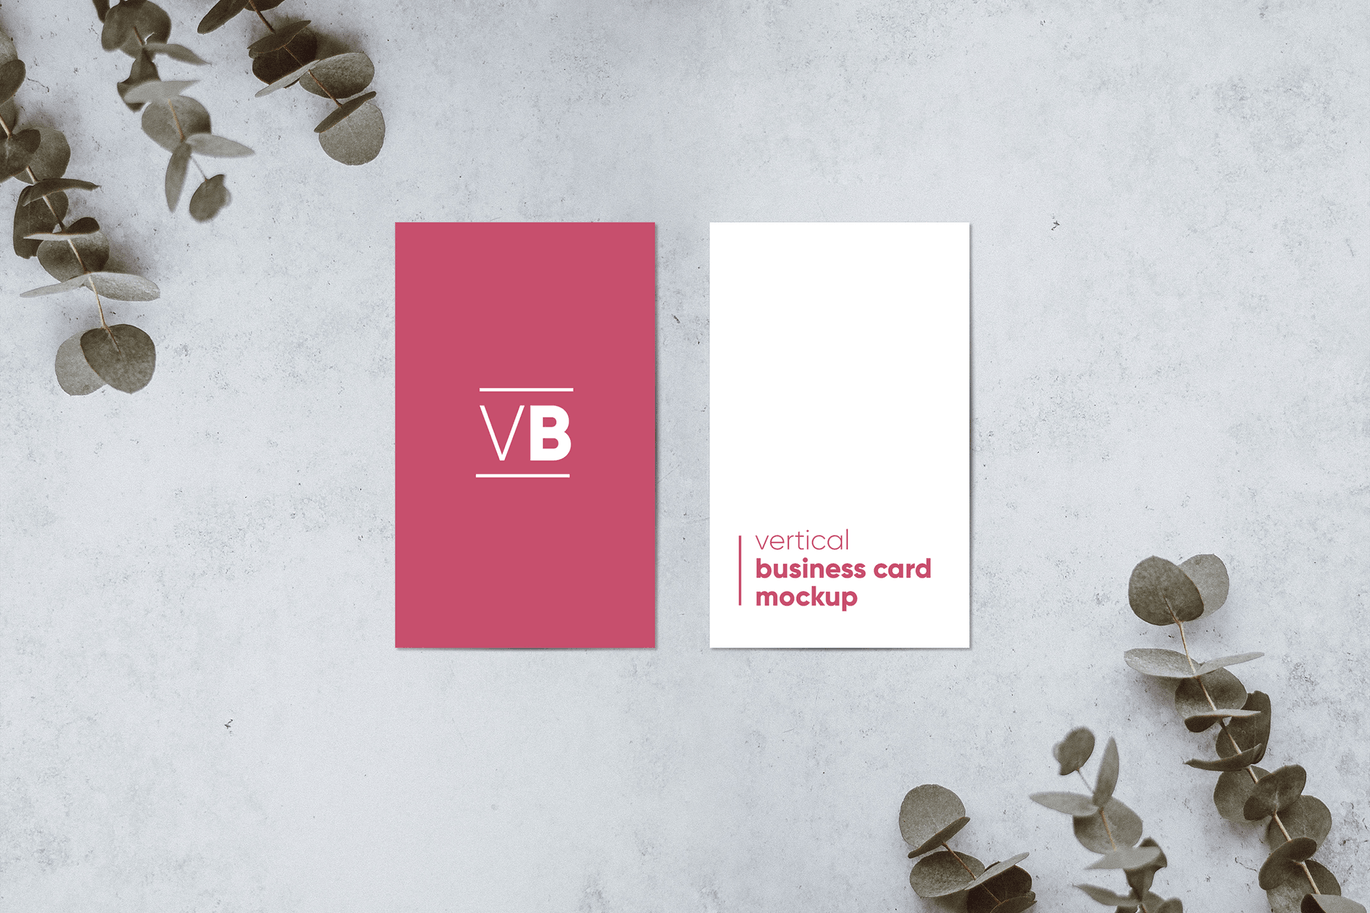 Vertical business card mockup template